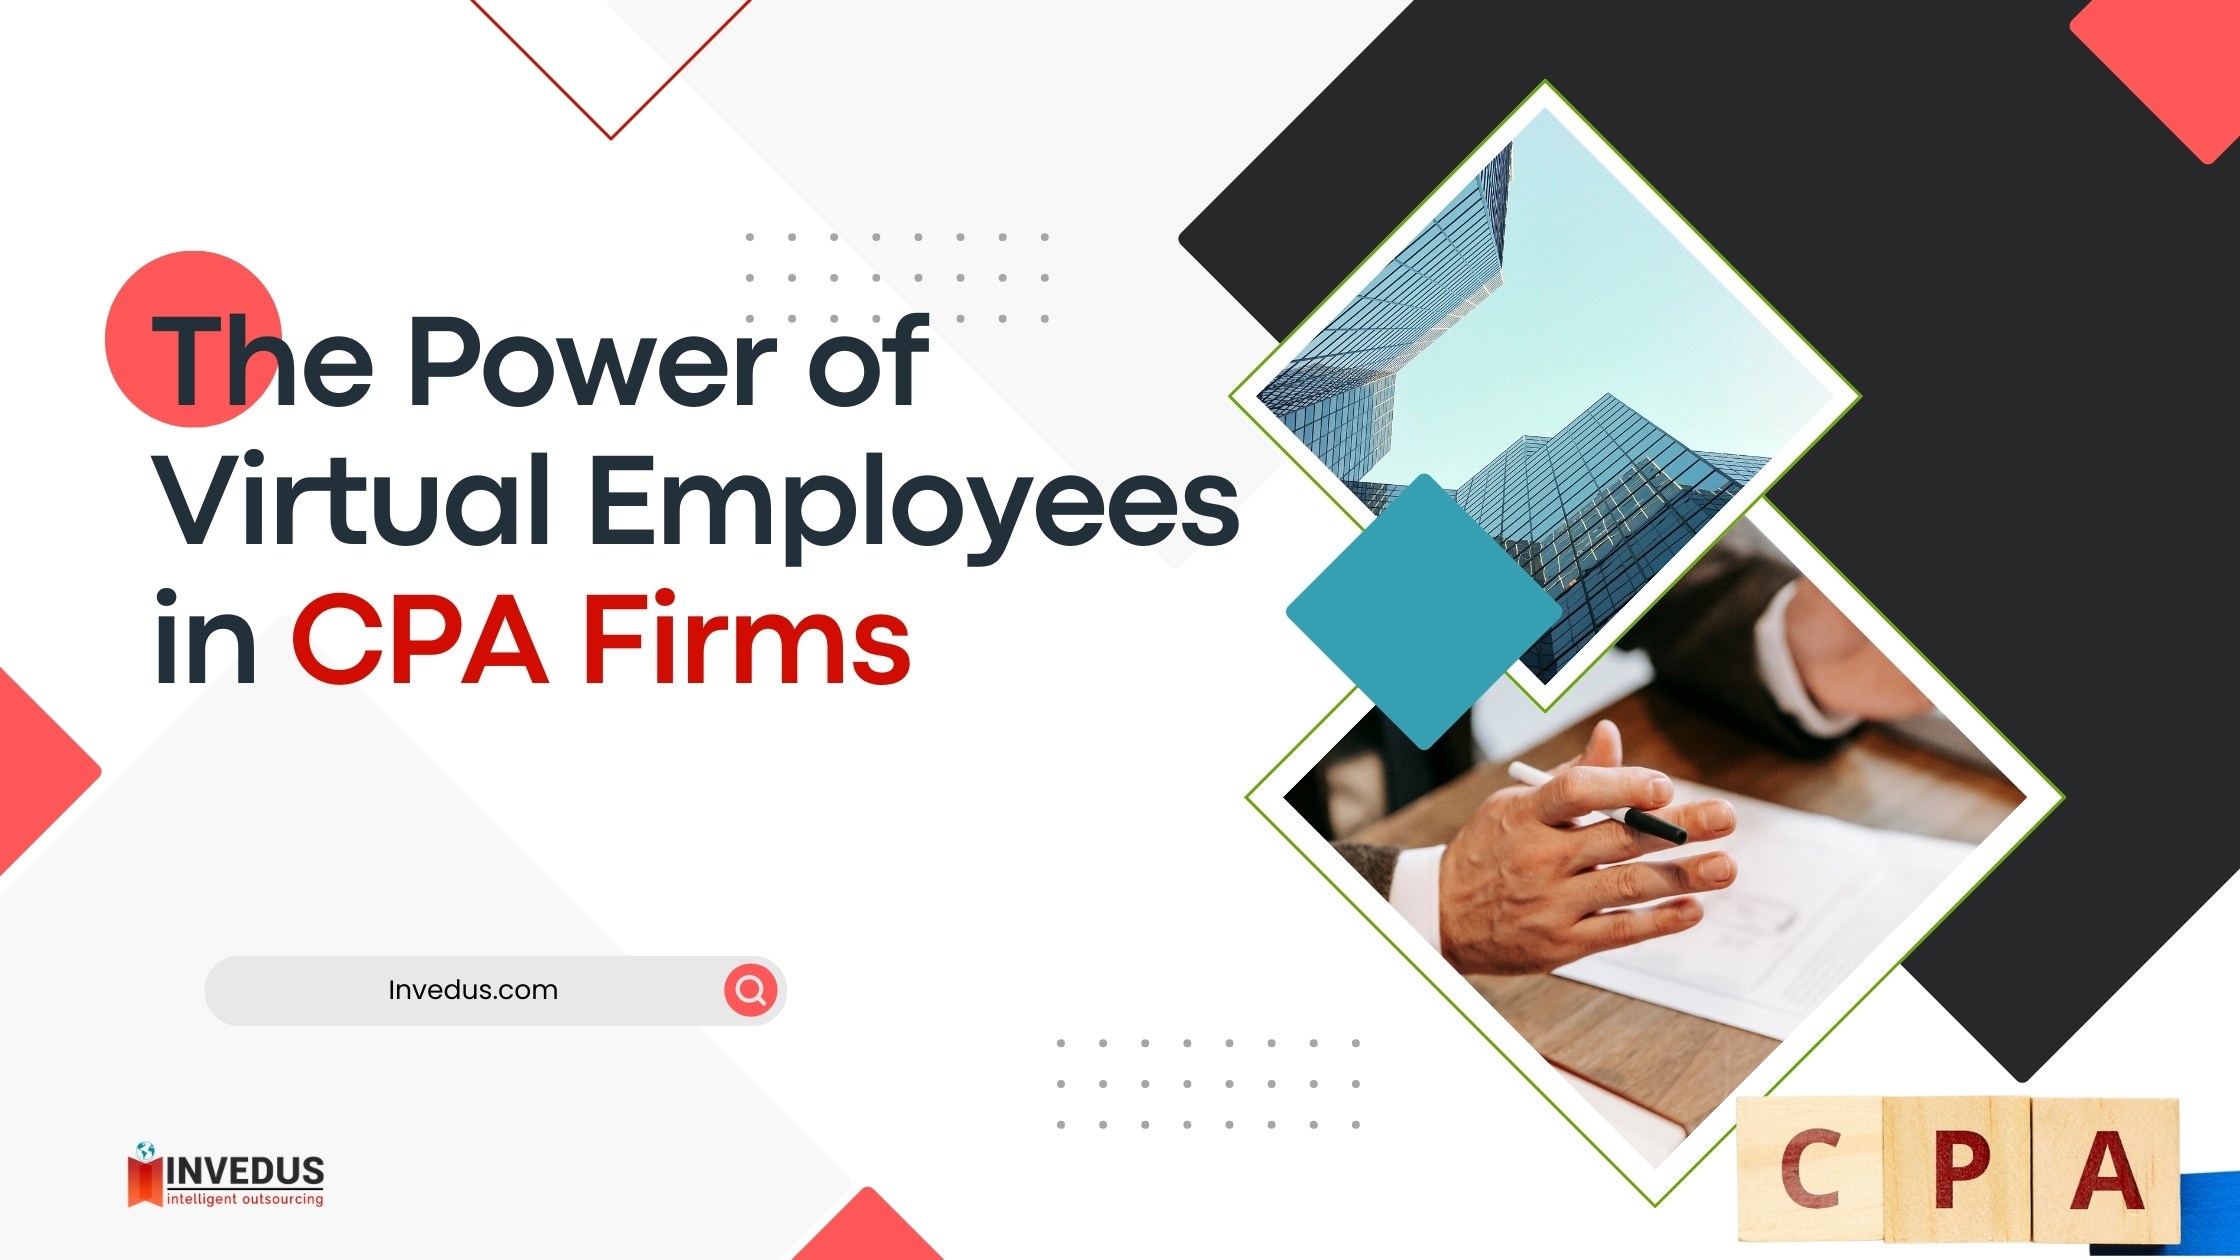 The Power of Virtual Employees in CPA Firms - Invedus